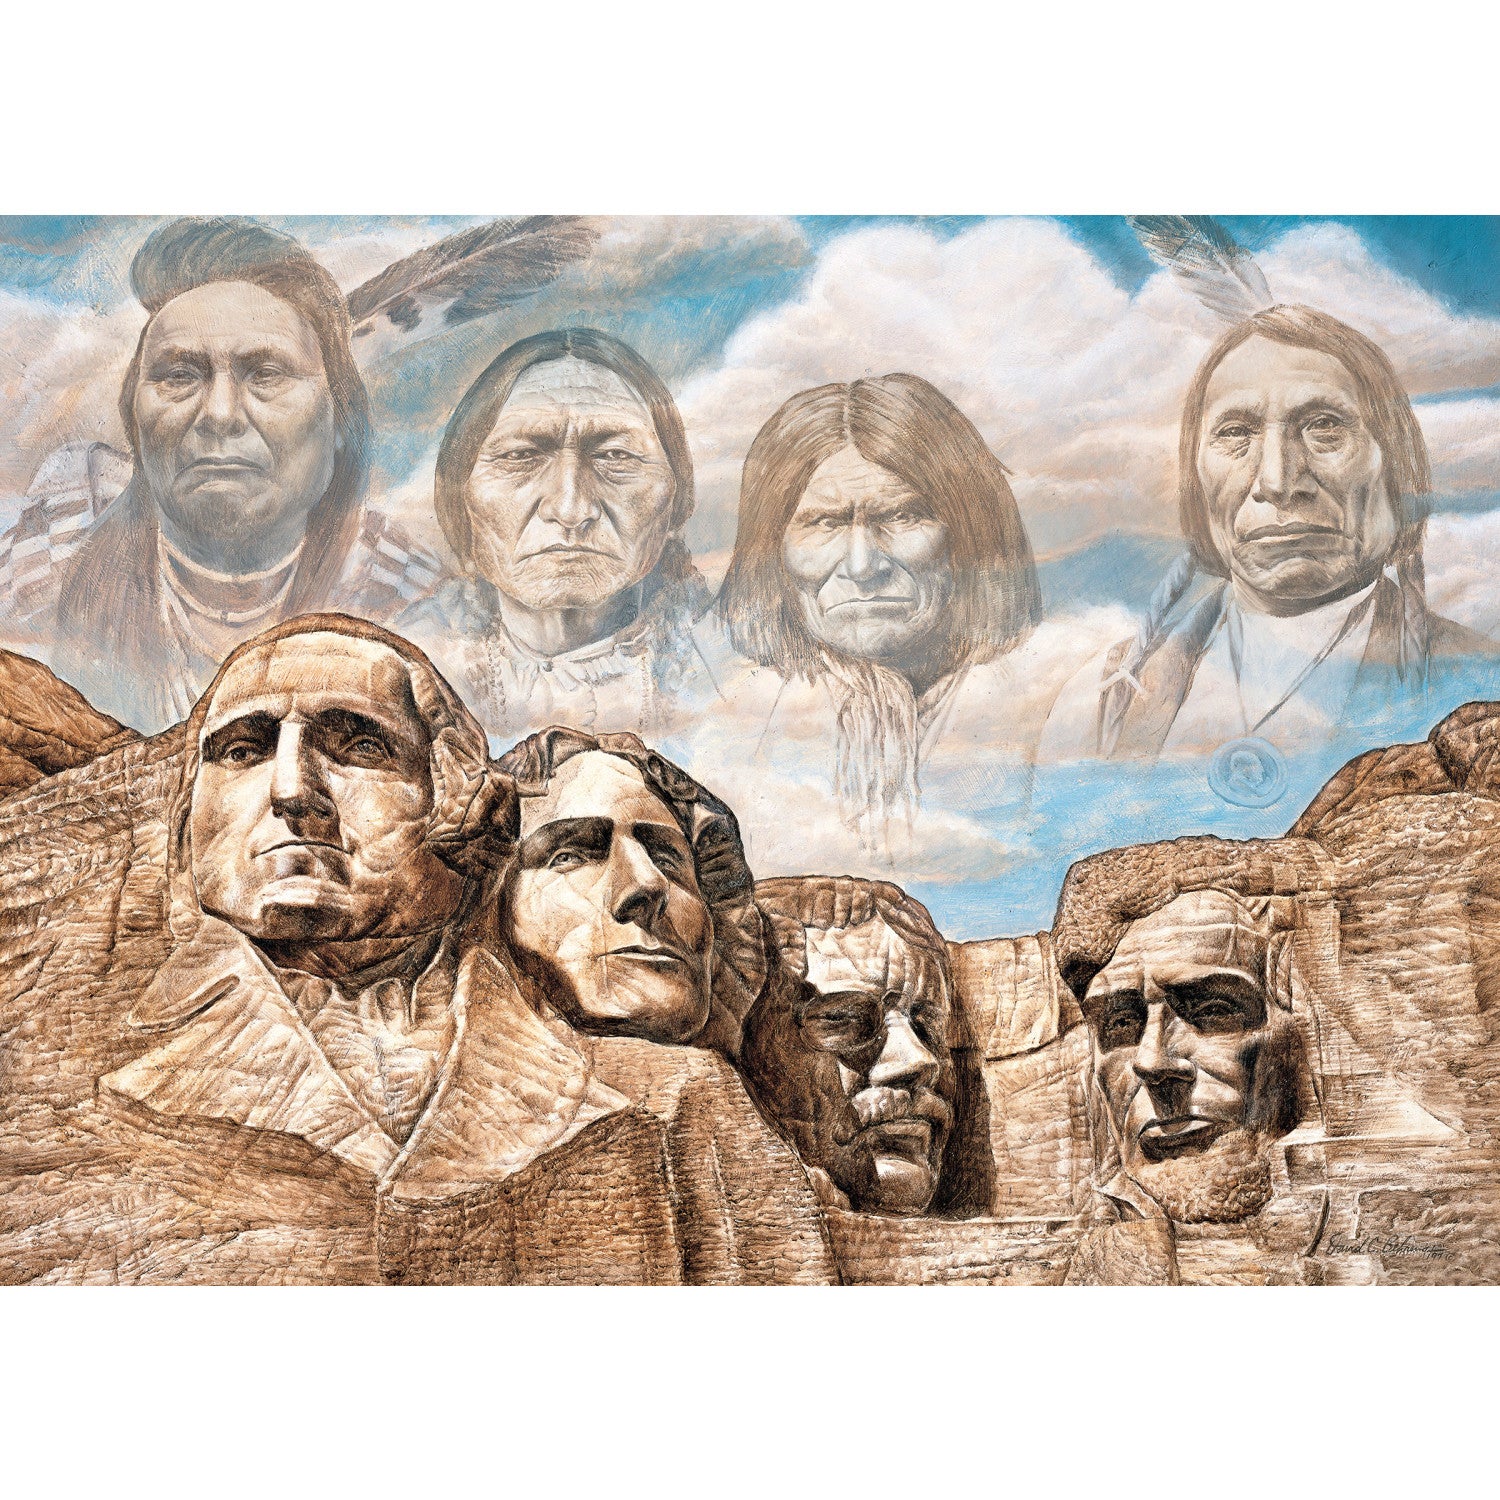 Tribal Spirit - Founding Fathers 550 Piece Puzzle